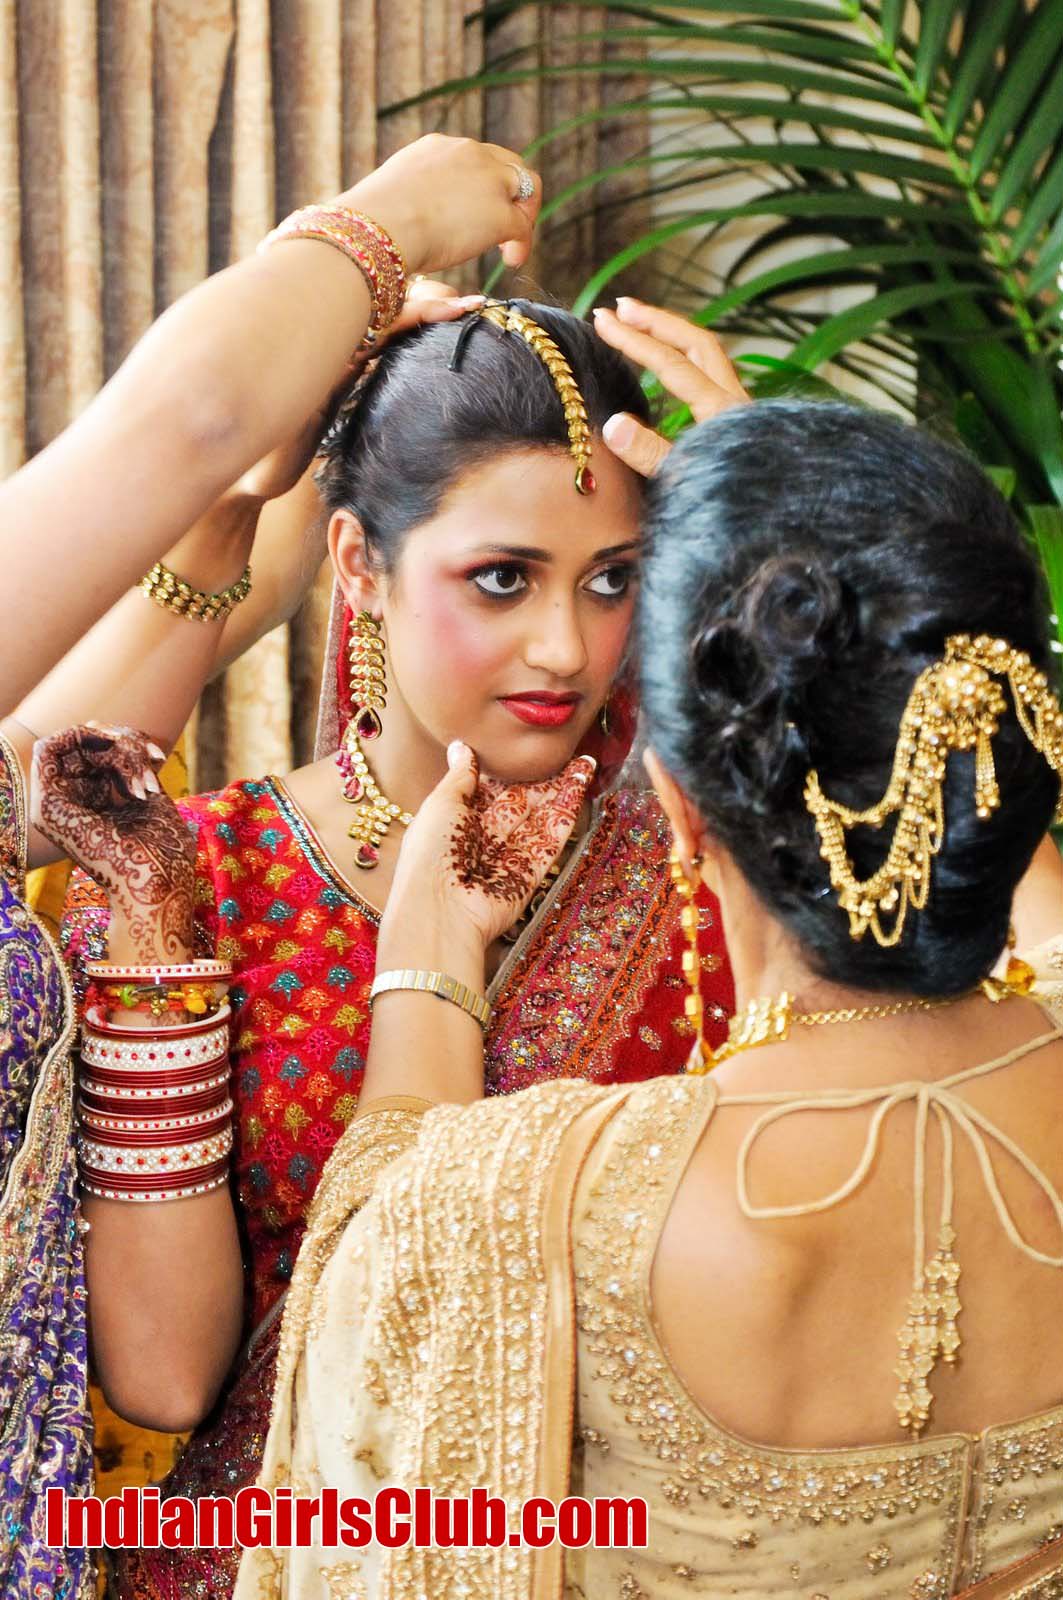 Traditional Indian Bride Nude - indian brides jewellery - Indian Girls Club - Nude Indian ...